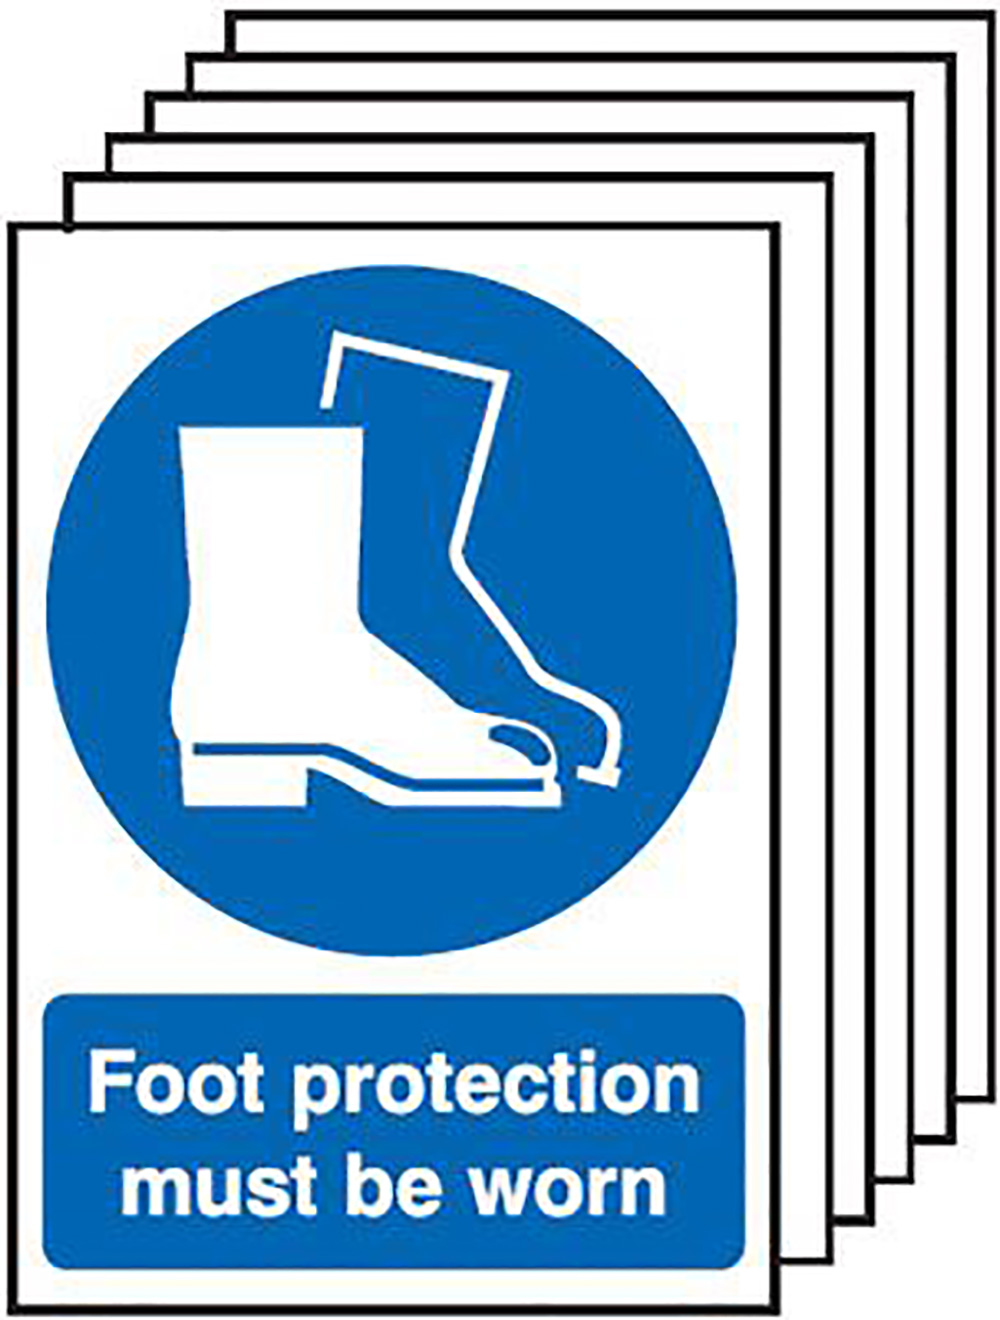 Foot Protection Must Be Worn  297x210mm Self Adhesive Vinyl Safety Sign Pack of 6 